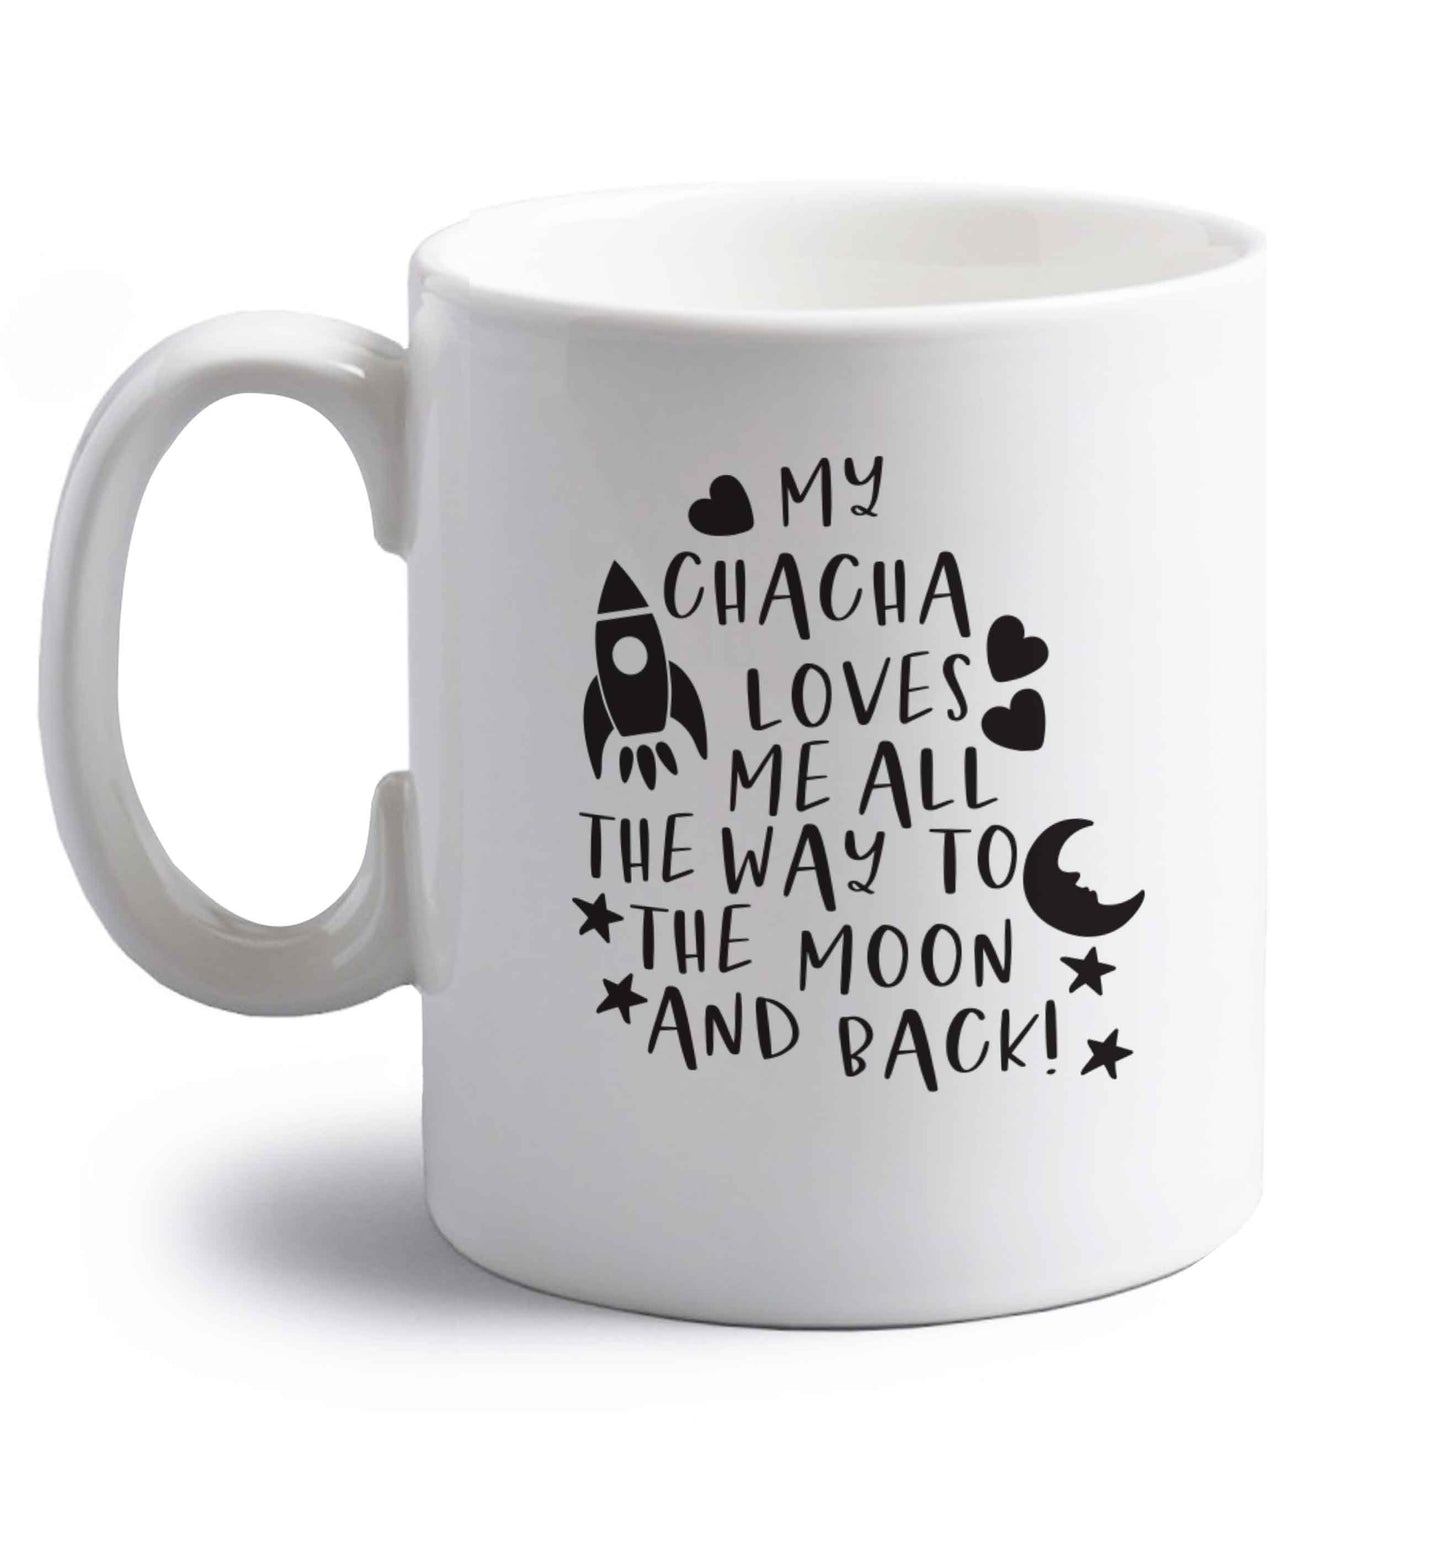 My chacha loves me all the way to the moon and back right handed white ceramic mug 